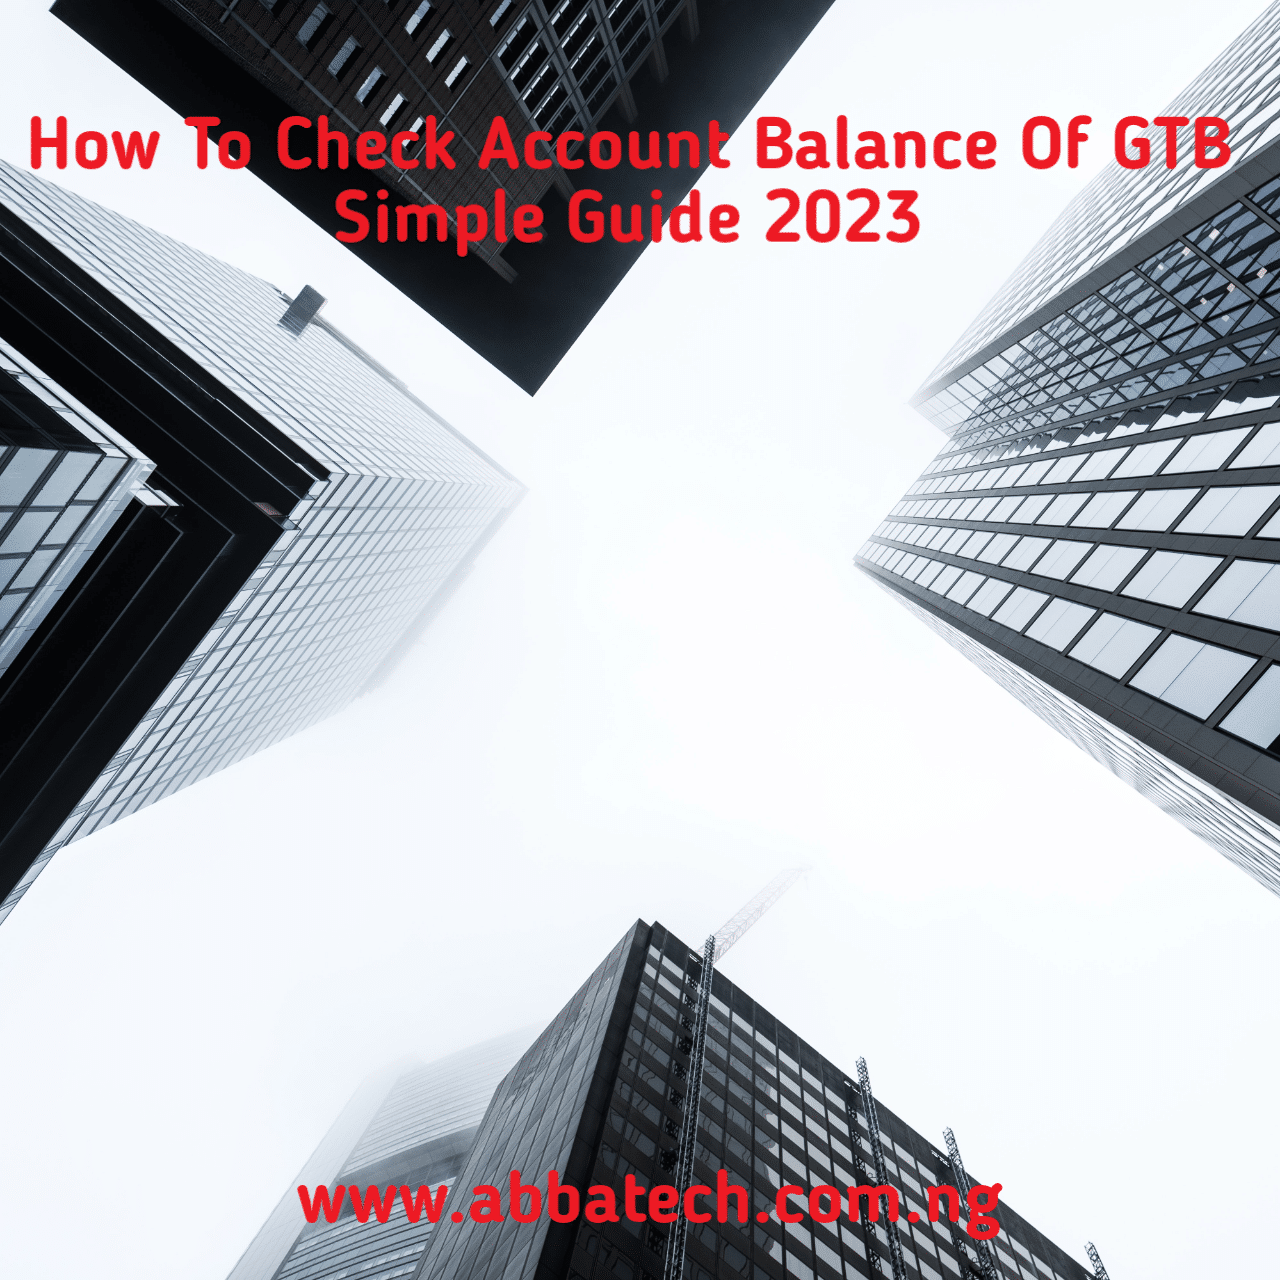 How To Check Account Balance Of GTB Simple Guide 2023